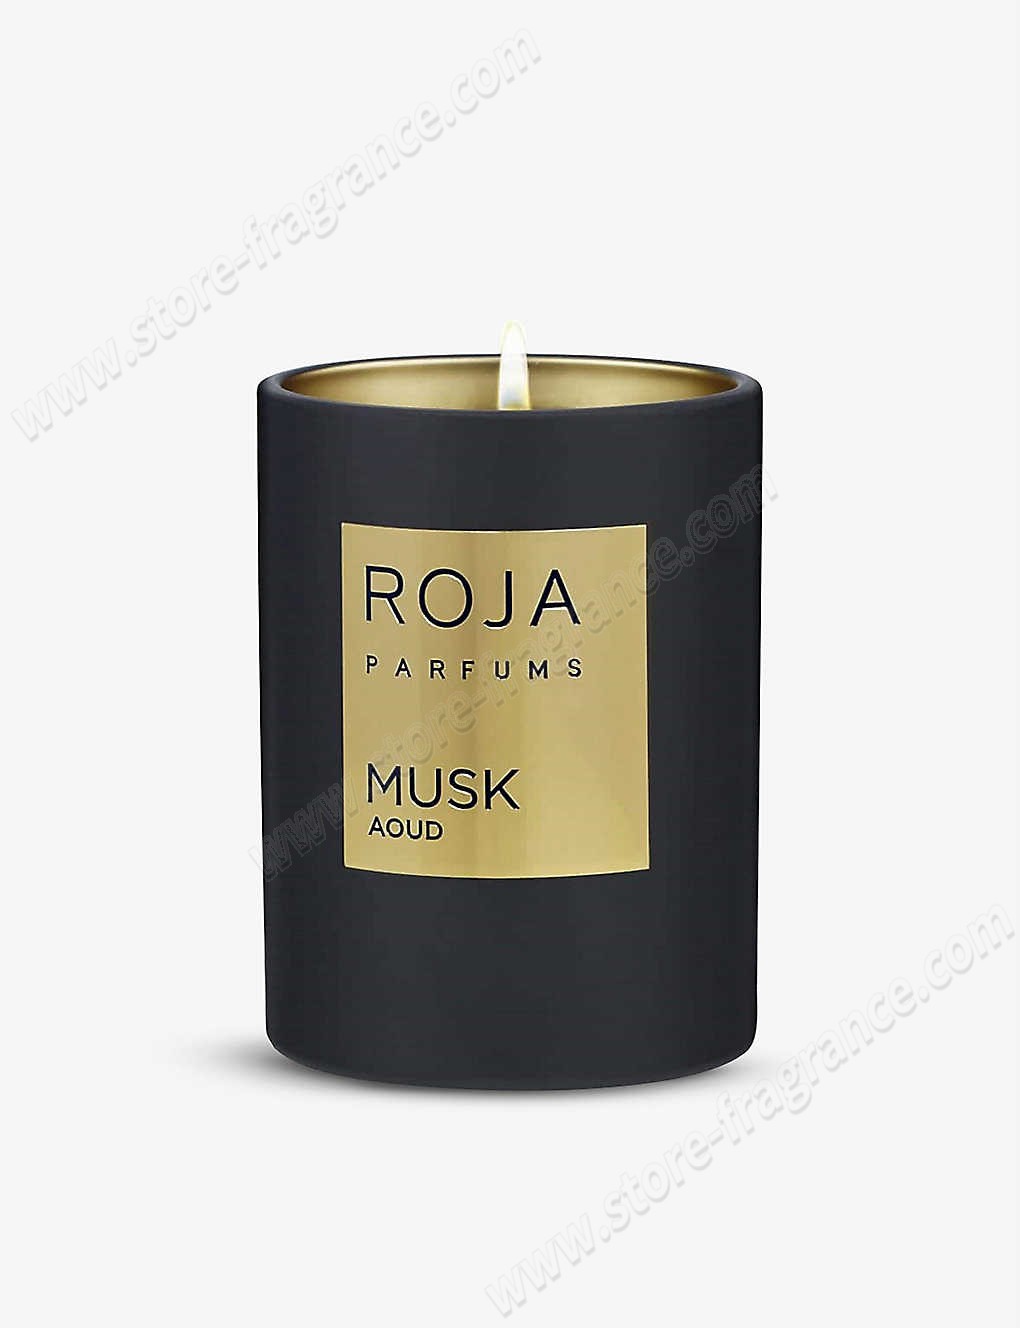 ROJA PARFUMS/Musk Aoud scented candle 300g ✿ Discount Store - ROJA PARFUMS/Musk Aoud scented candle 300g ✿ Discount Store